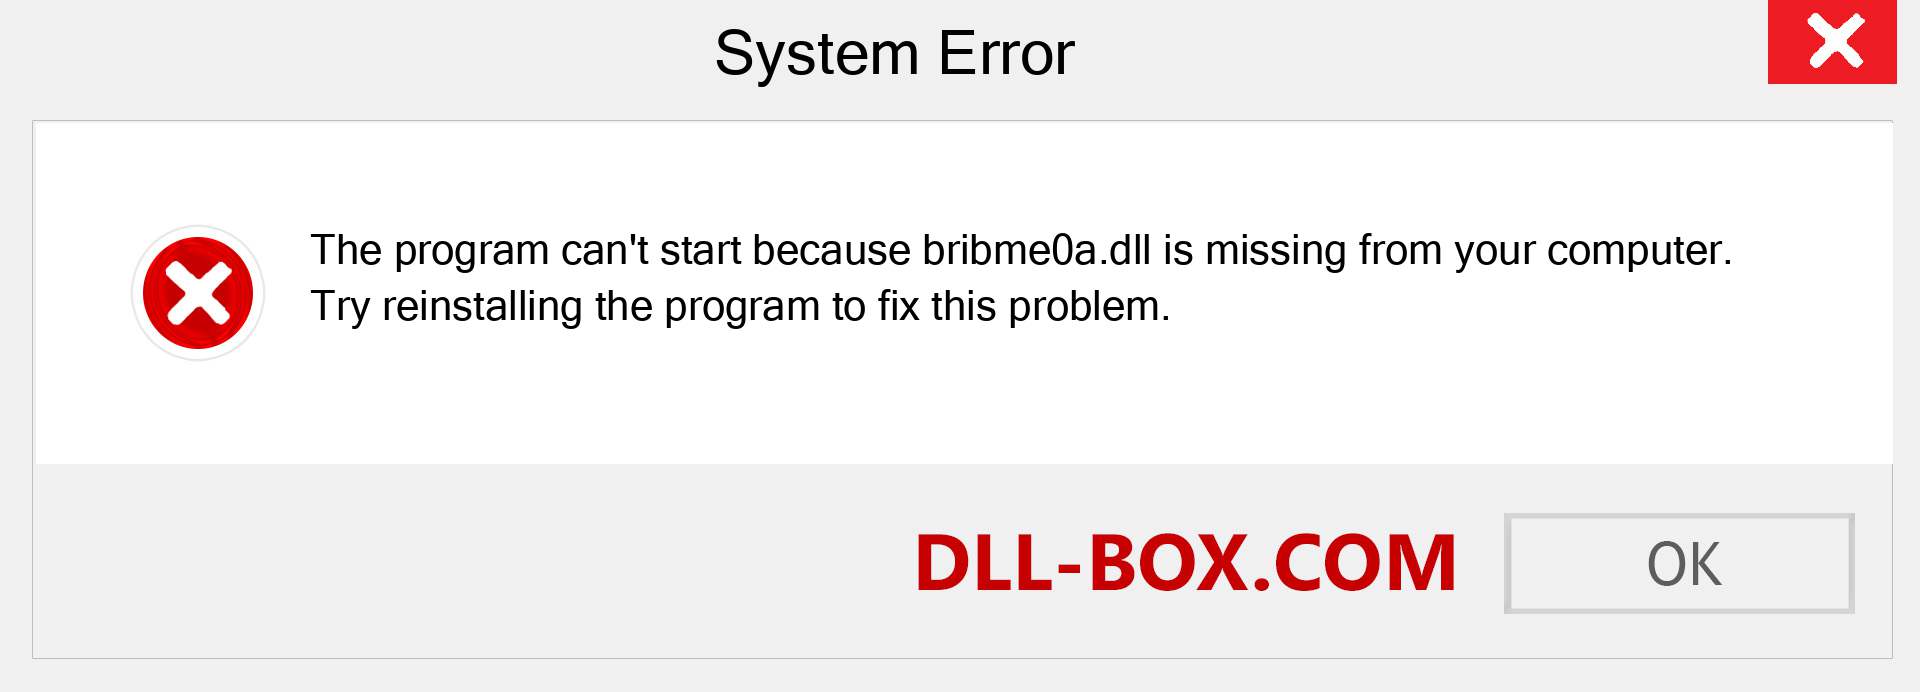  bribme0a.dll file is missing?. Download for Windows 7, 8, 10 - Fix  bribme0a dll Missing Error on Windows, photos, images